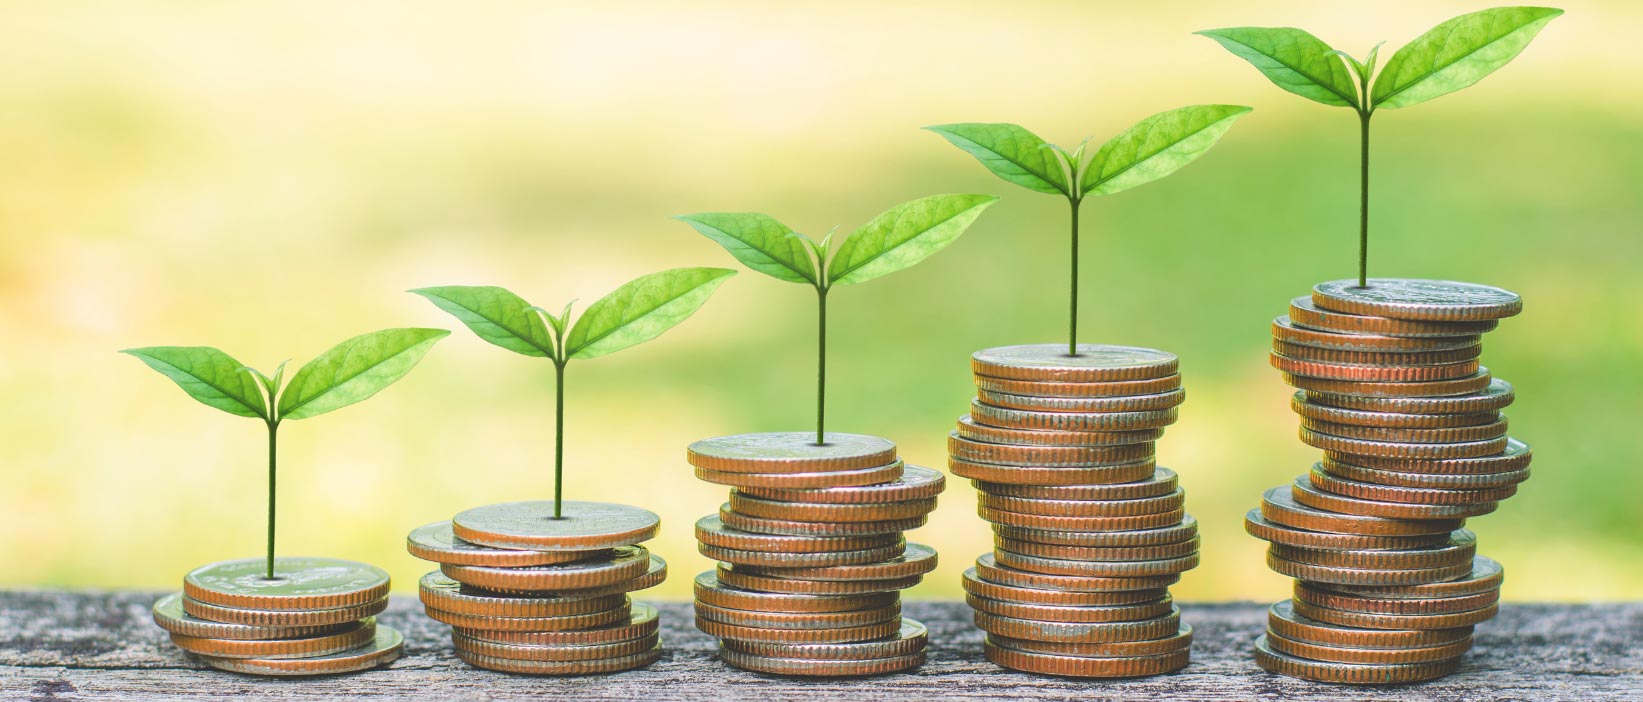 The Benefits of Sustainable & Ethical Investing